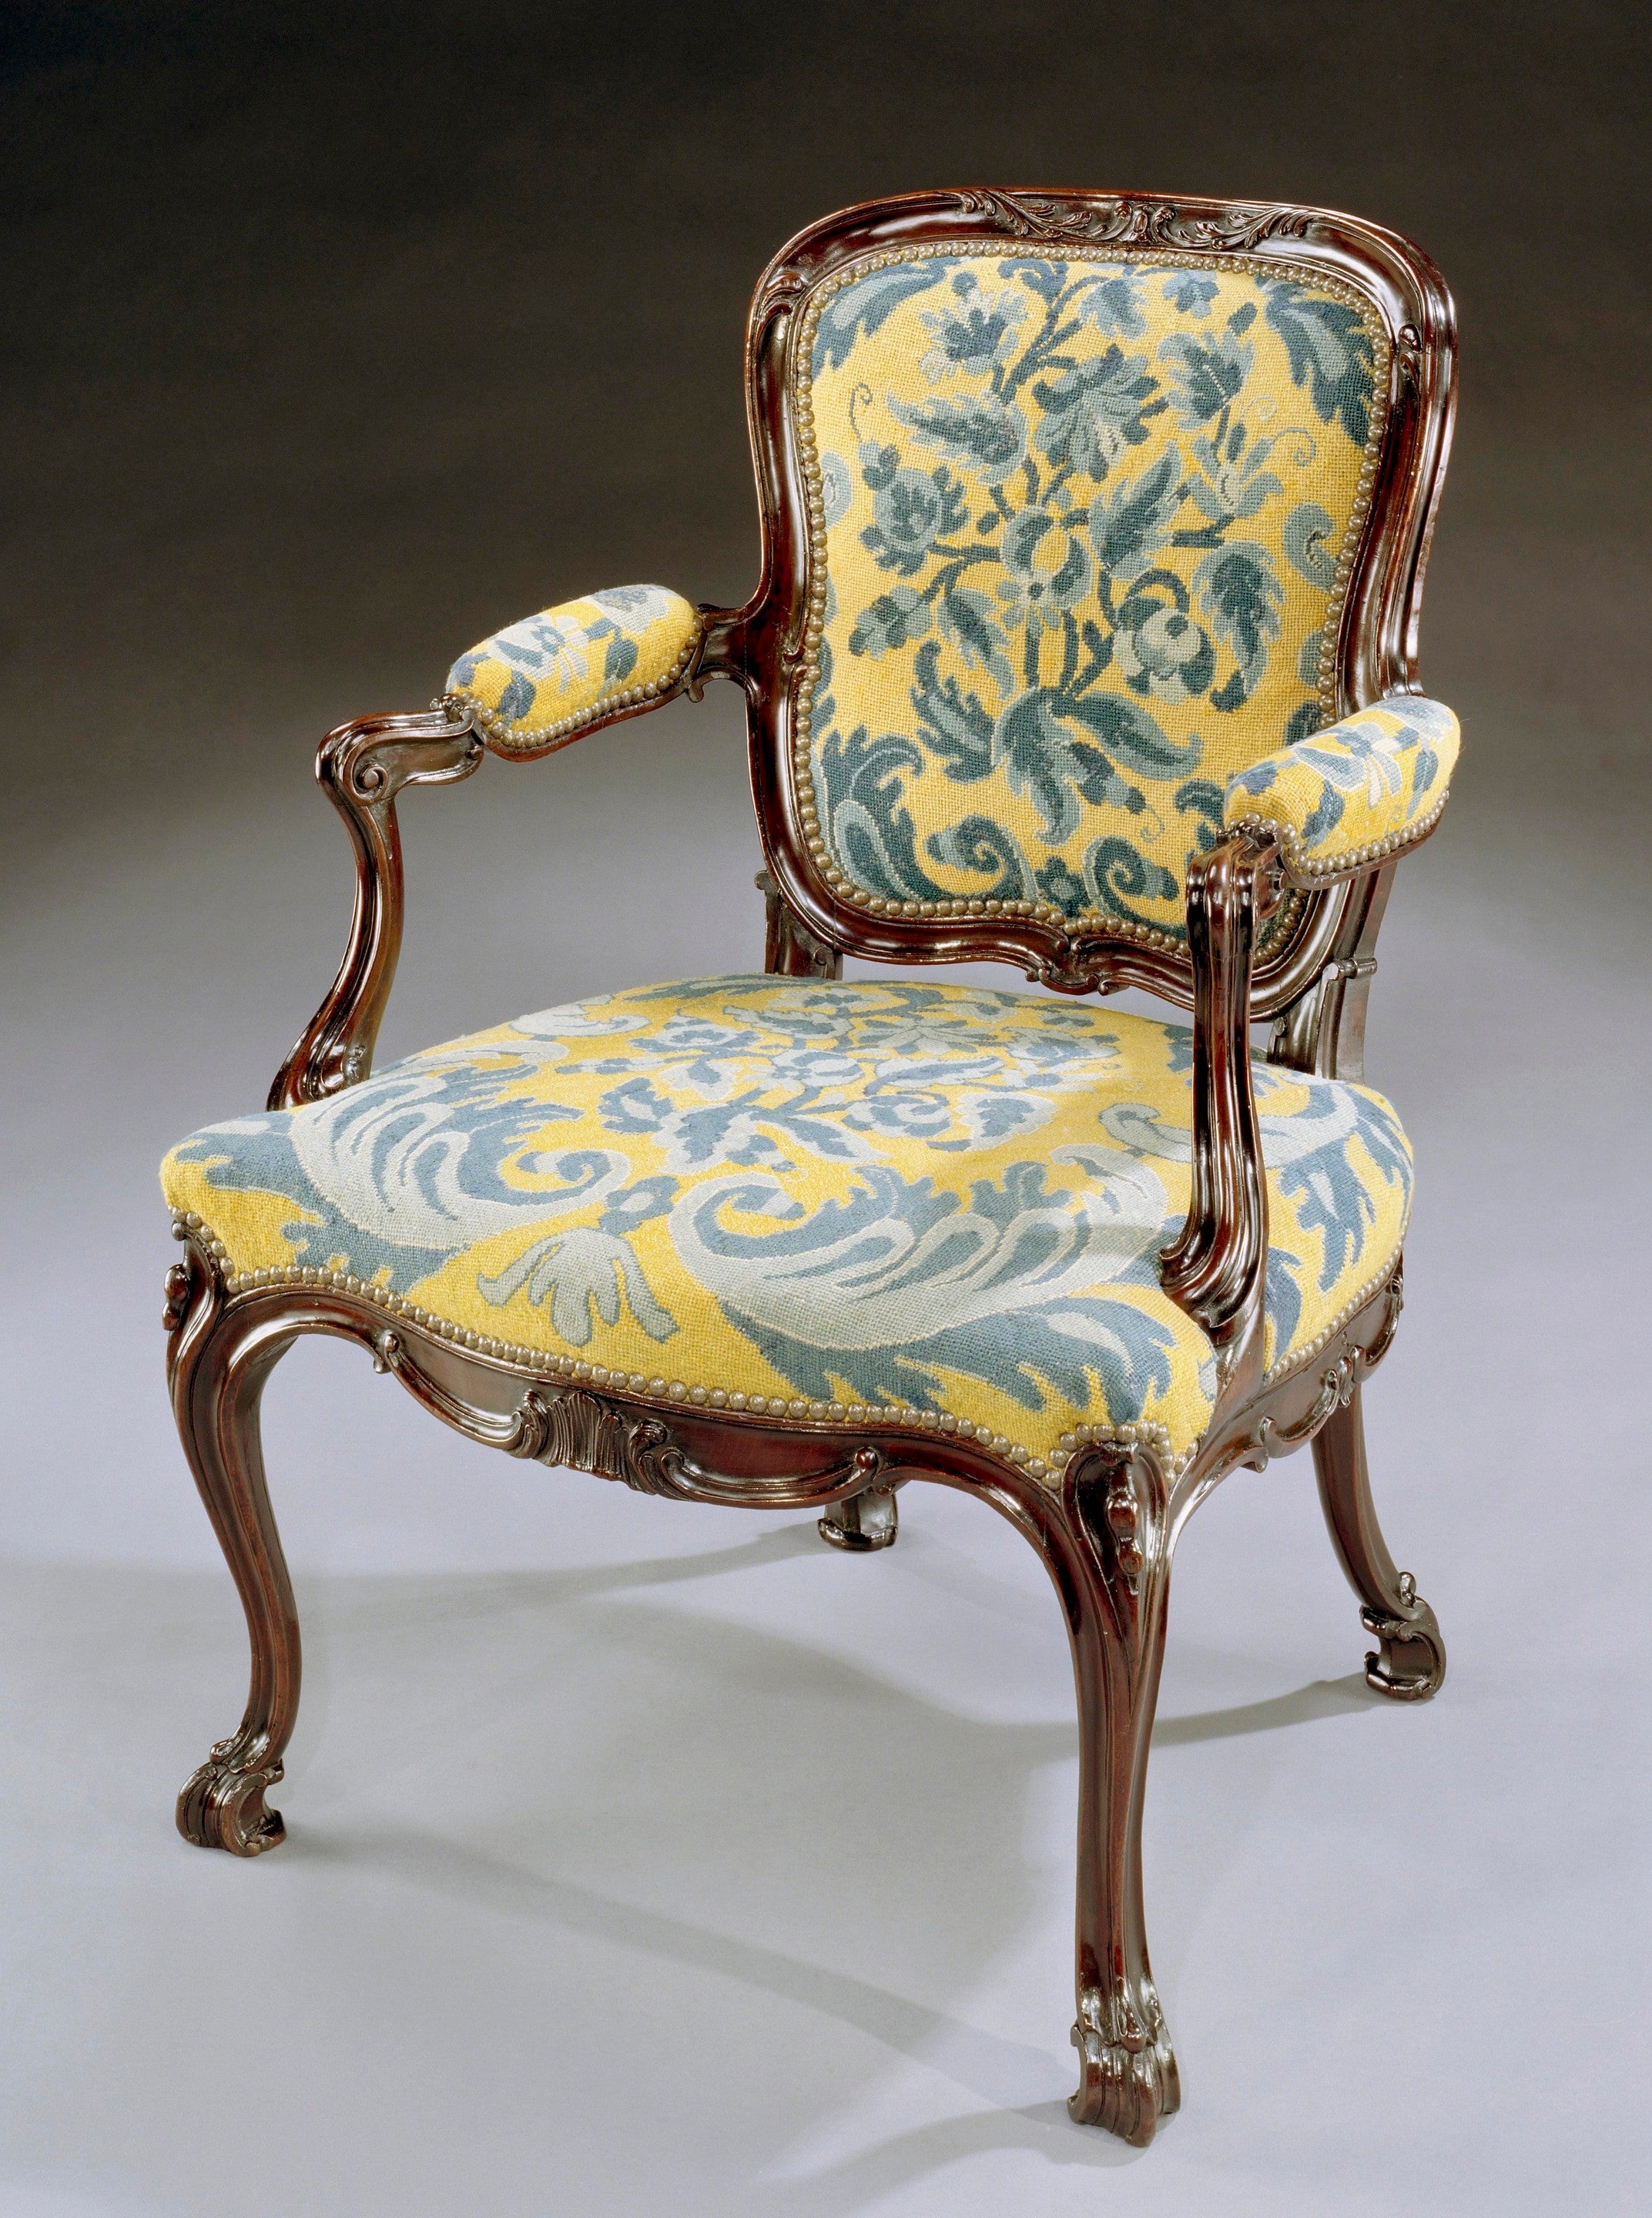 A George III Carved Mahogany Needlework Armchair (4486711) For Sale